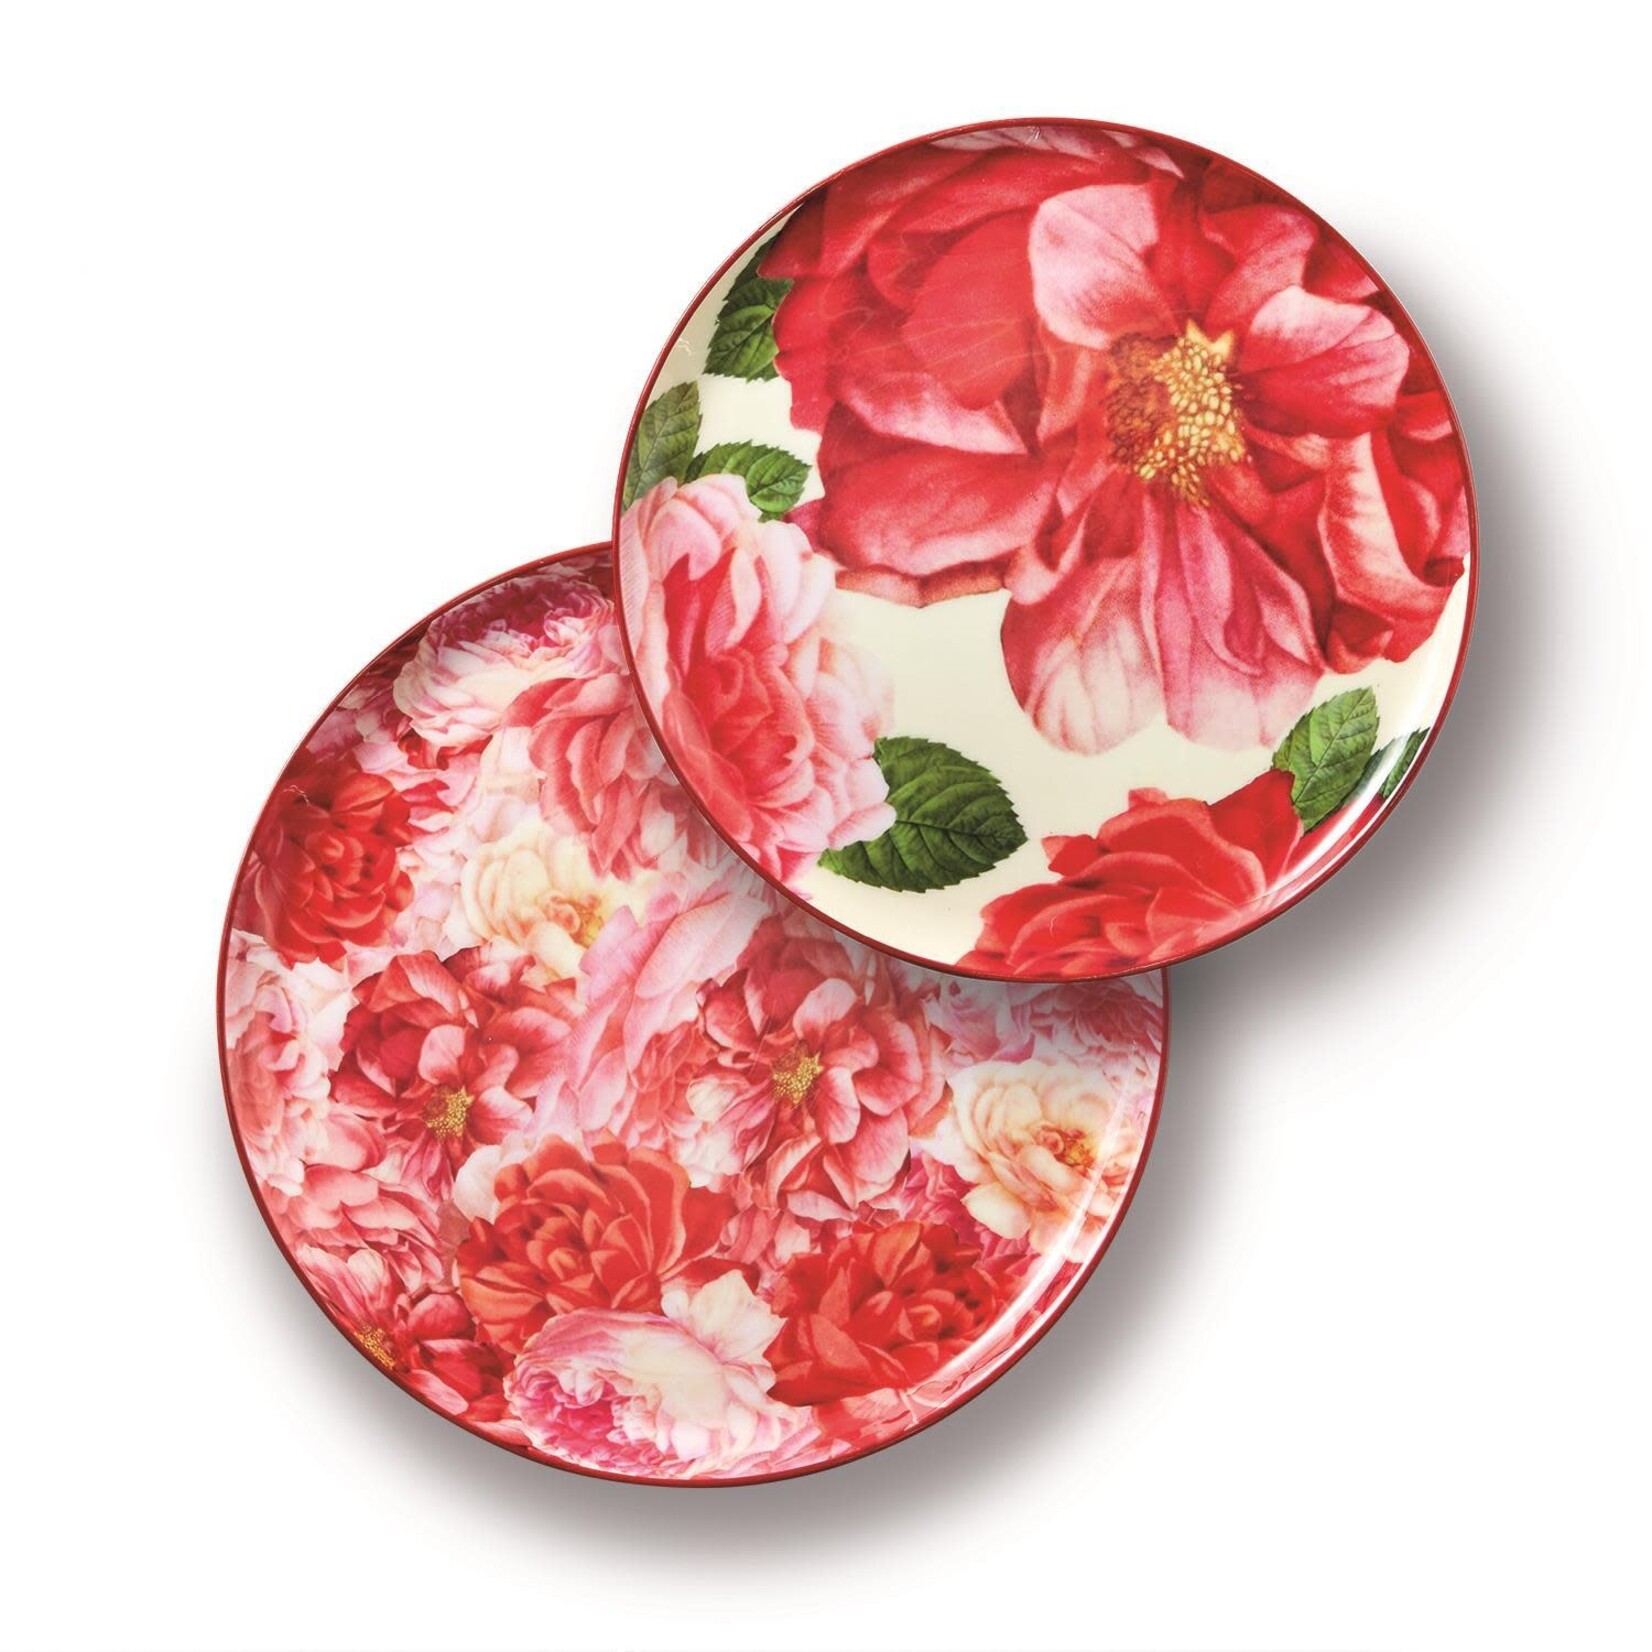 Two's Company Rose Print Tray Large